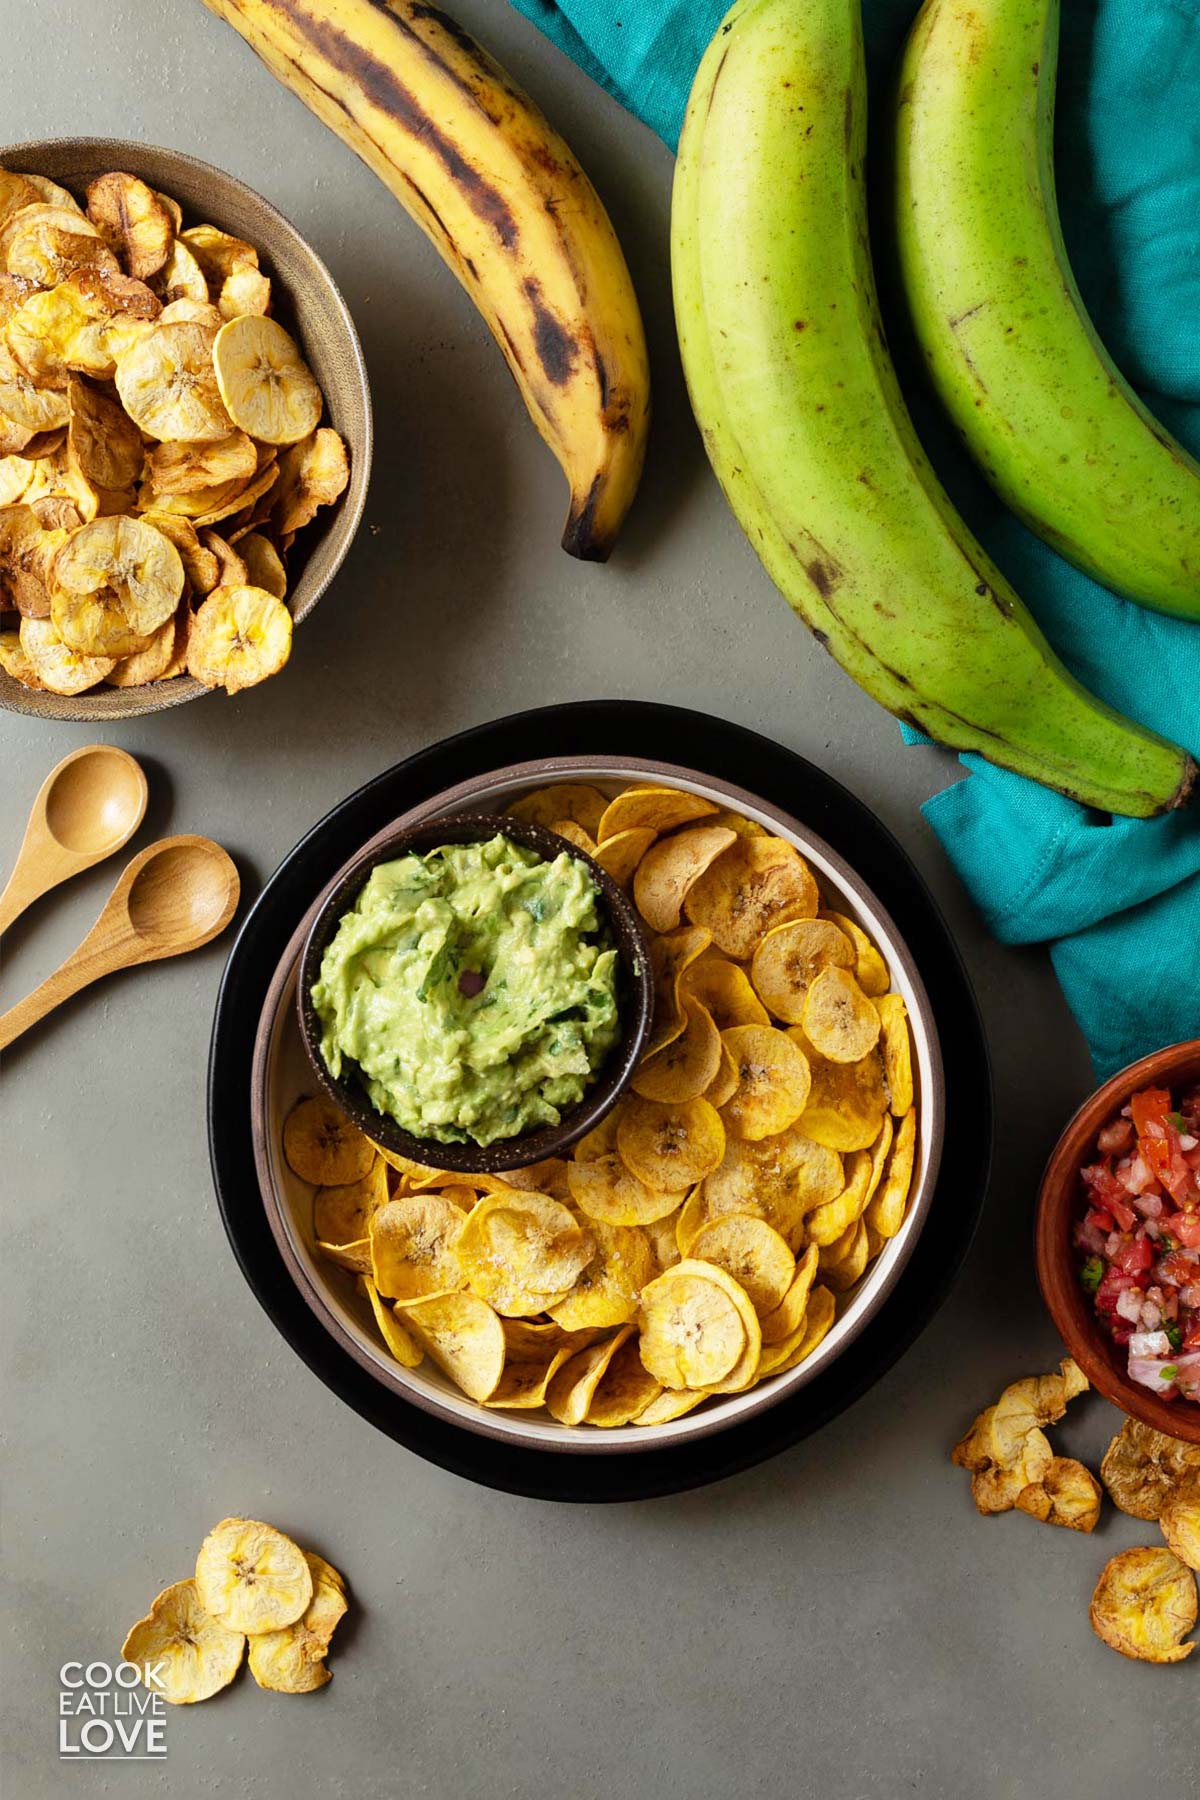 Bowl of plantain chips on the table with green plantains, guacamole and pico de gallo.